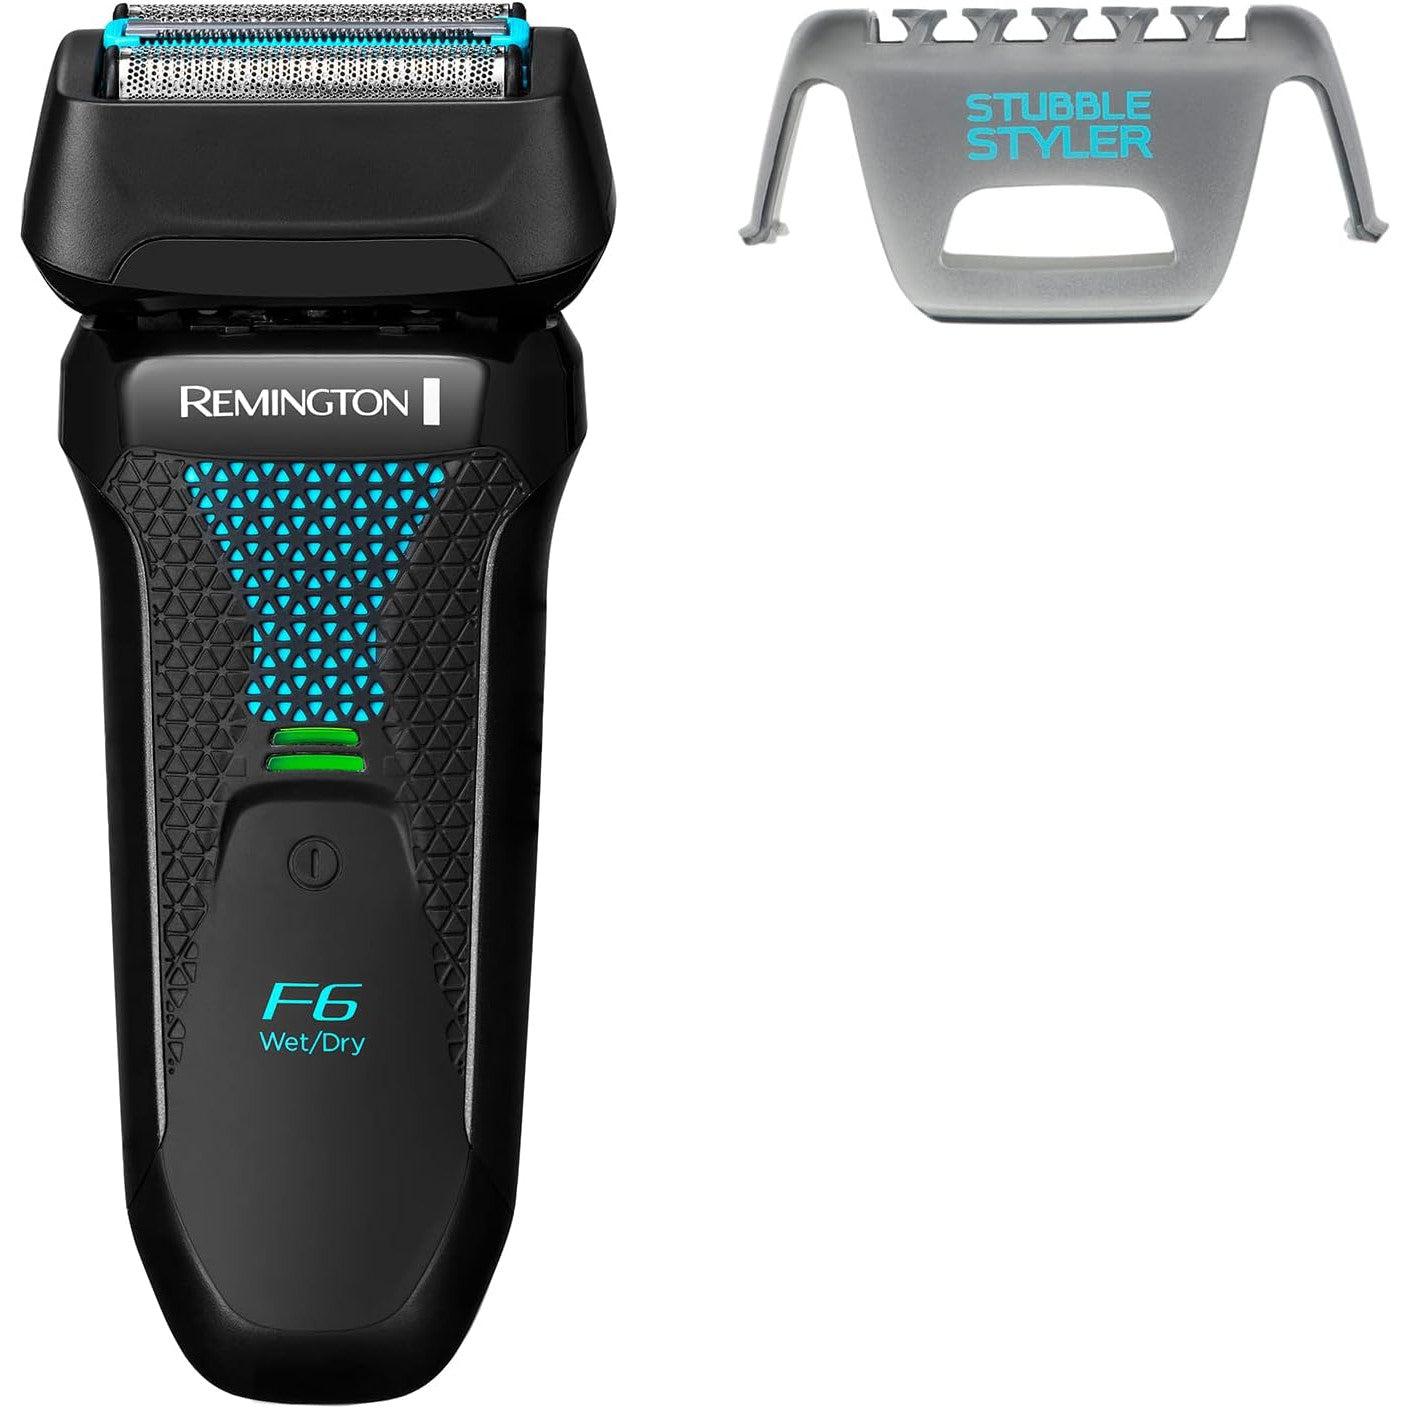 Remington F6 Style Series Aqua Electric Shaver for Men - 100% Waterproof Cordless Foil Razor with USB Charging and Pop-Up Trimmer; F6000, Black